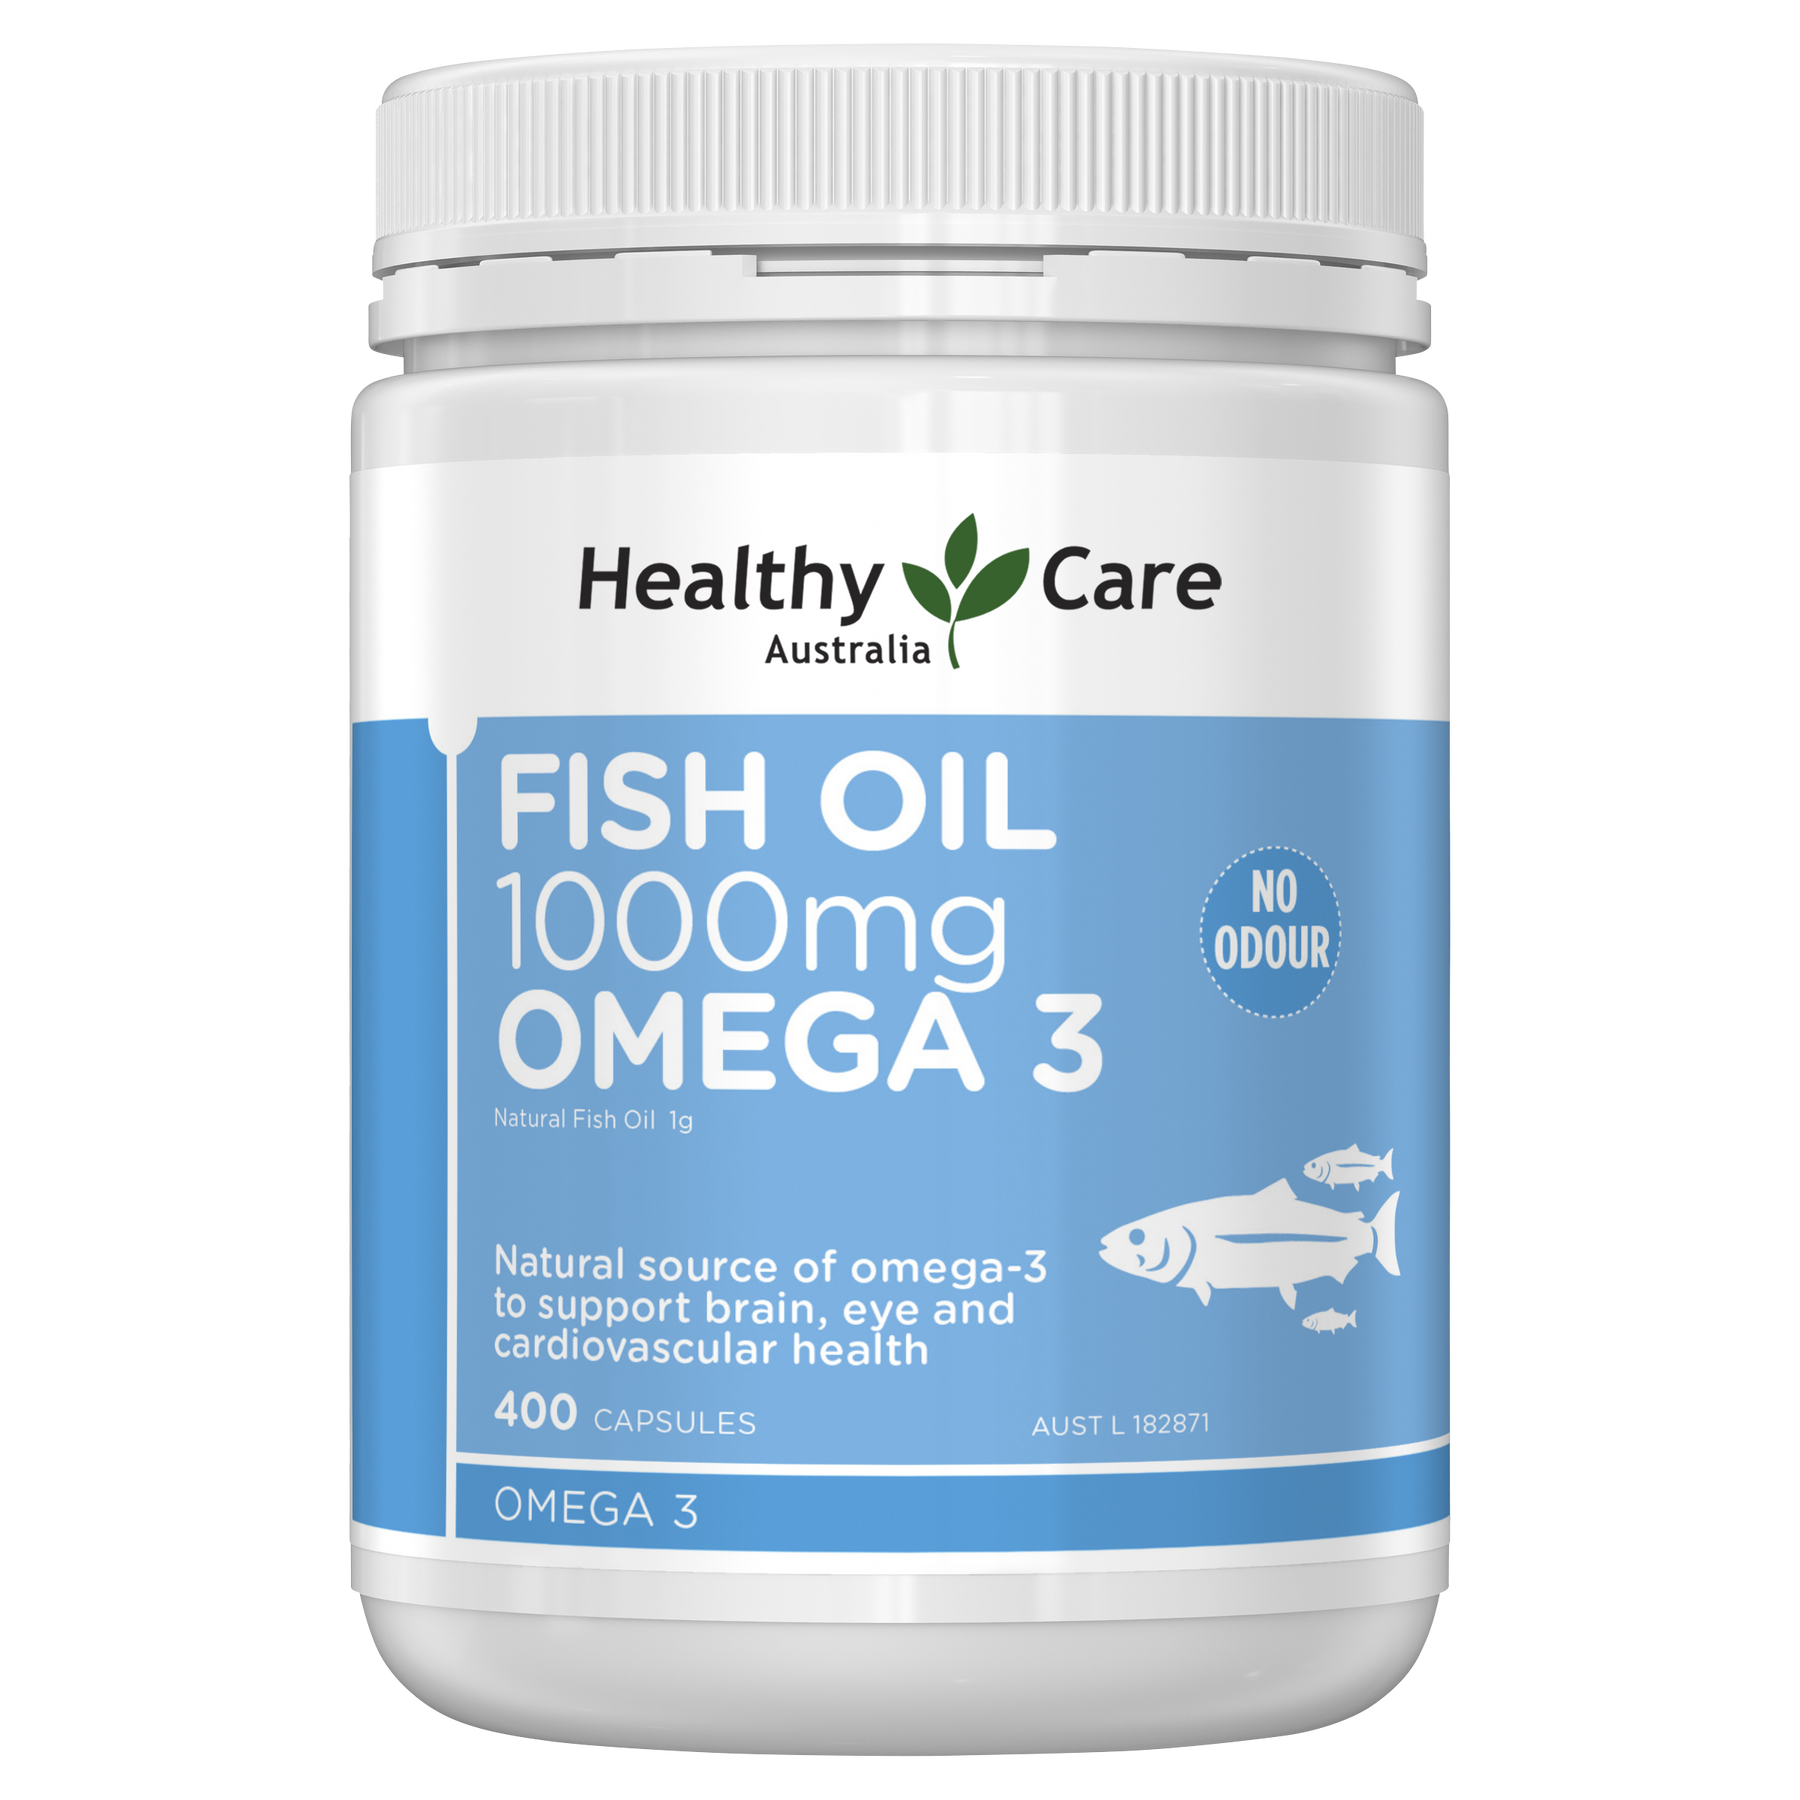 Healthy Care Fish Oil 1000mg Omega-3 - 400 capsules